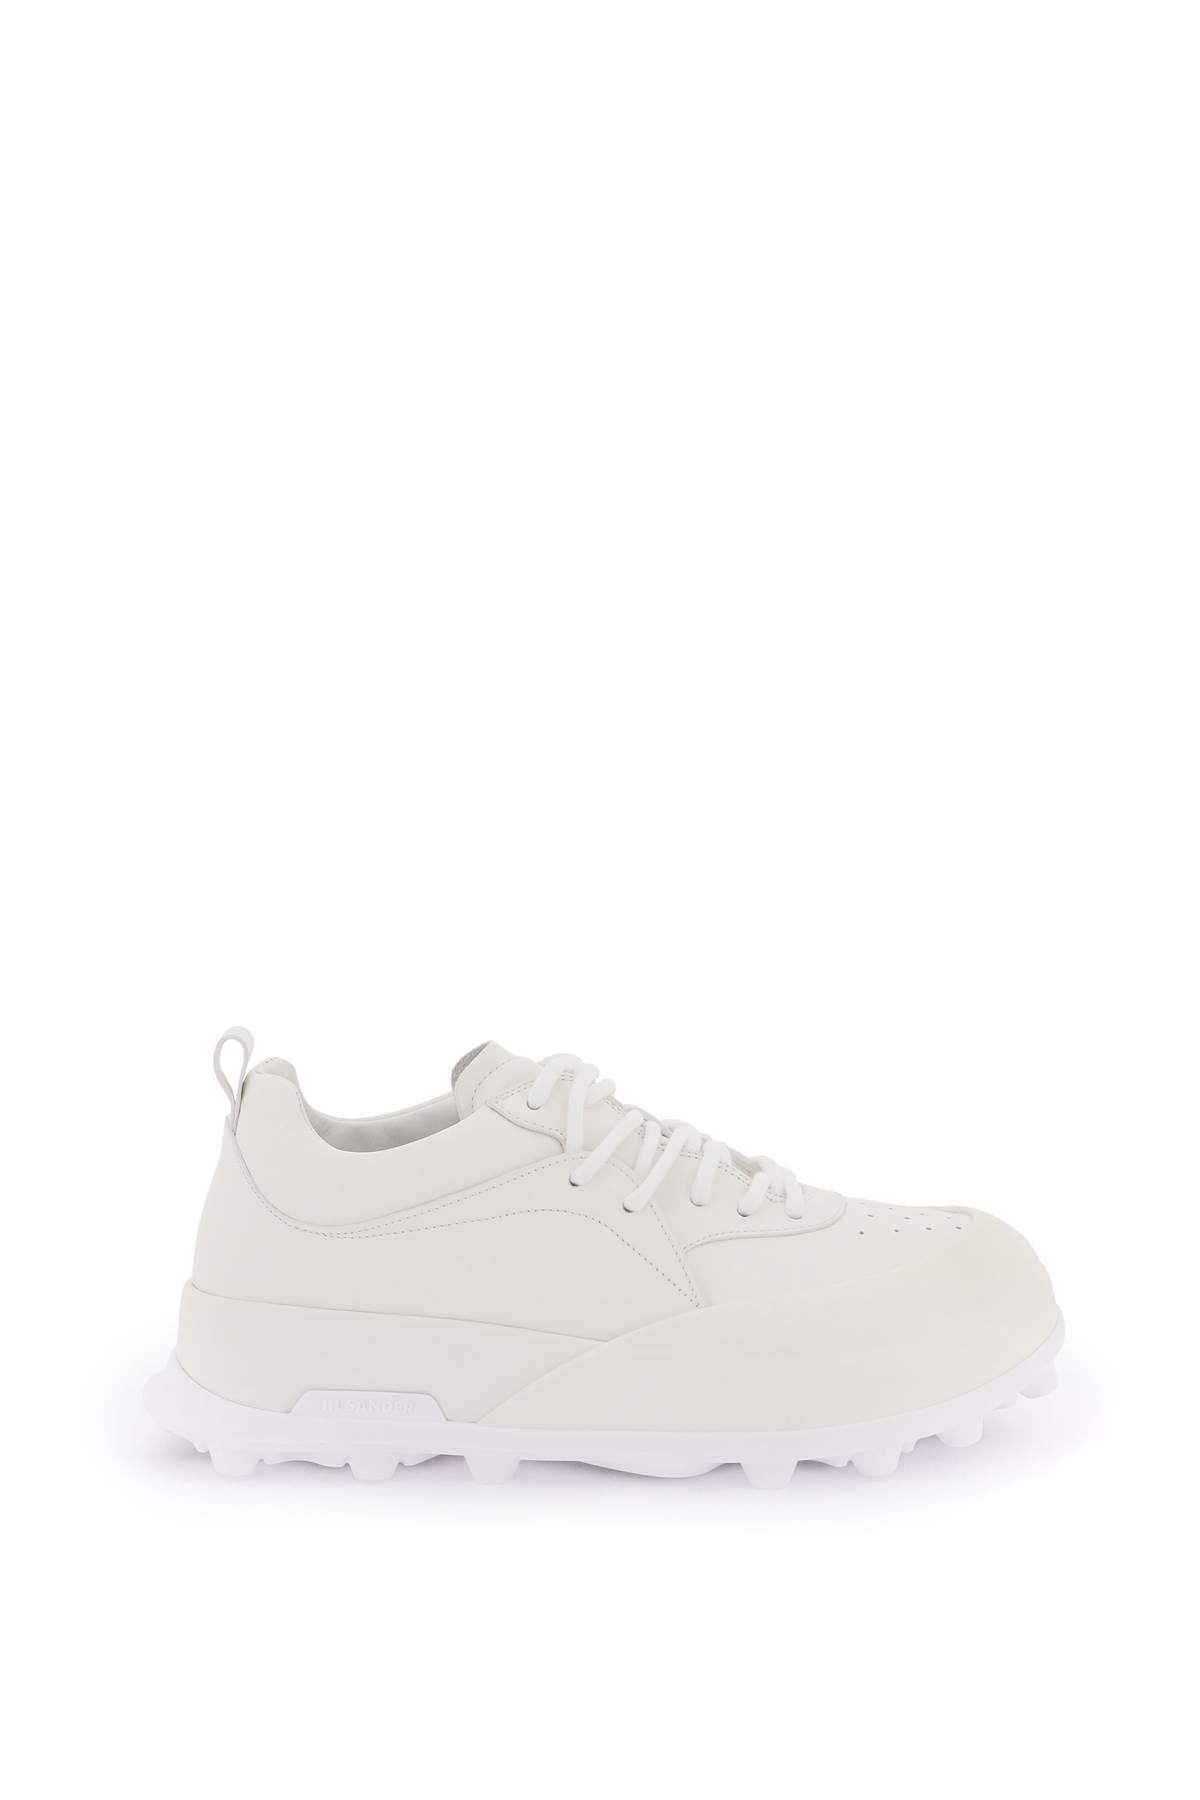 Shop Jil Sander Men's White Leather Sneakers For Ss24 Collection